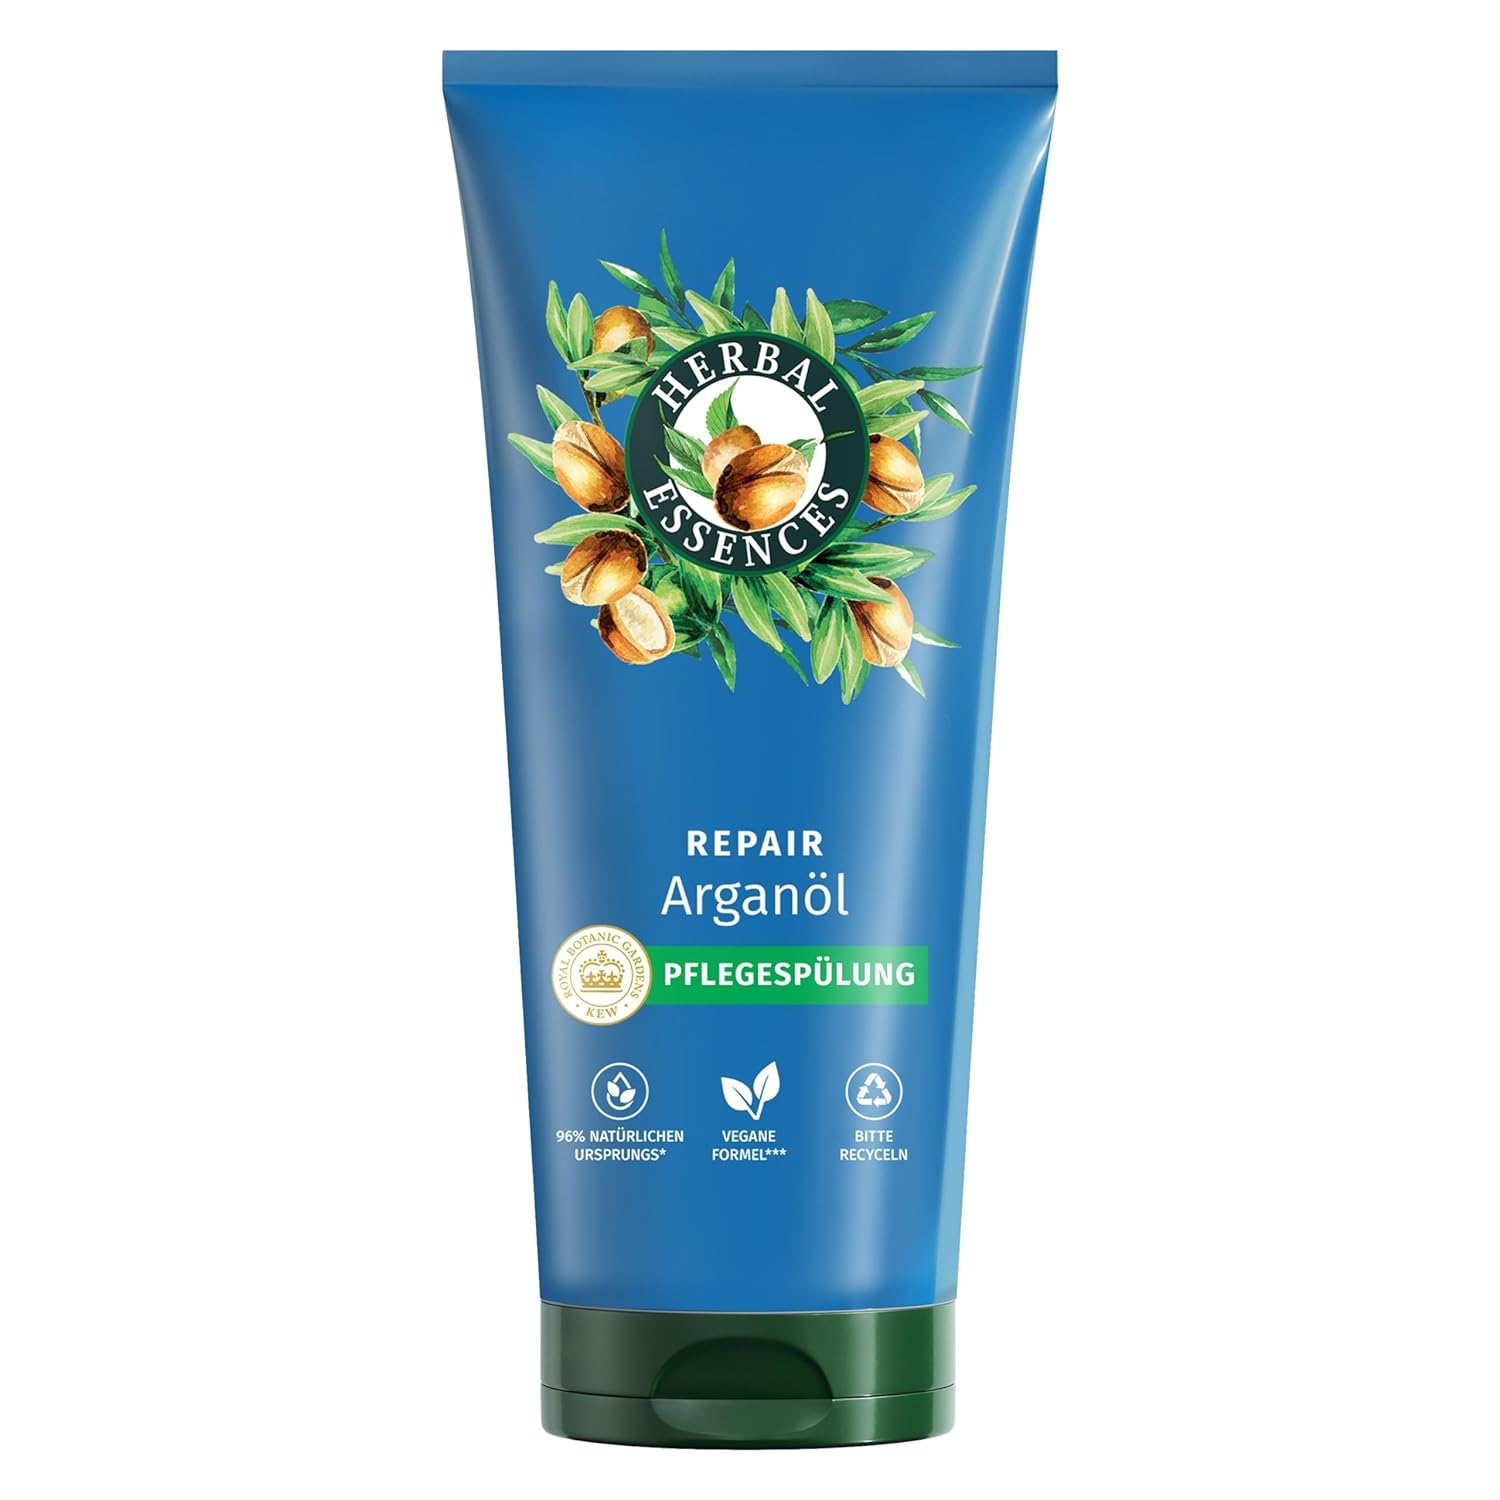 Herbal Essences Repair Conditioner with Argan Oil 250 ml from Damaged to Softer, Shiny Hair, Intensive Care, Ingredients of Natural Origin, Vegan